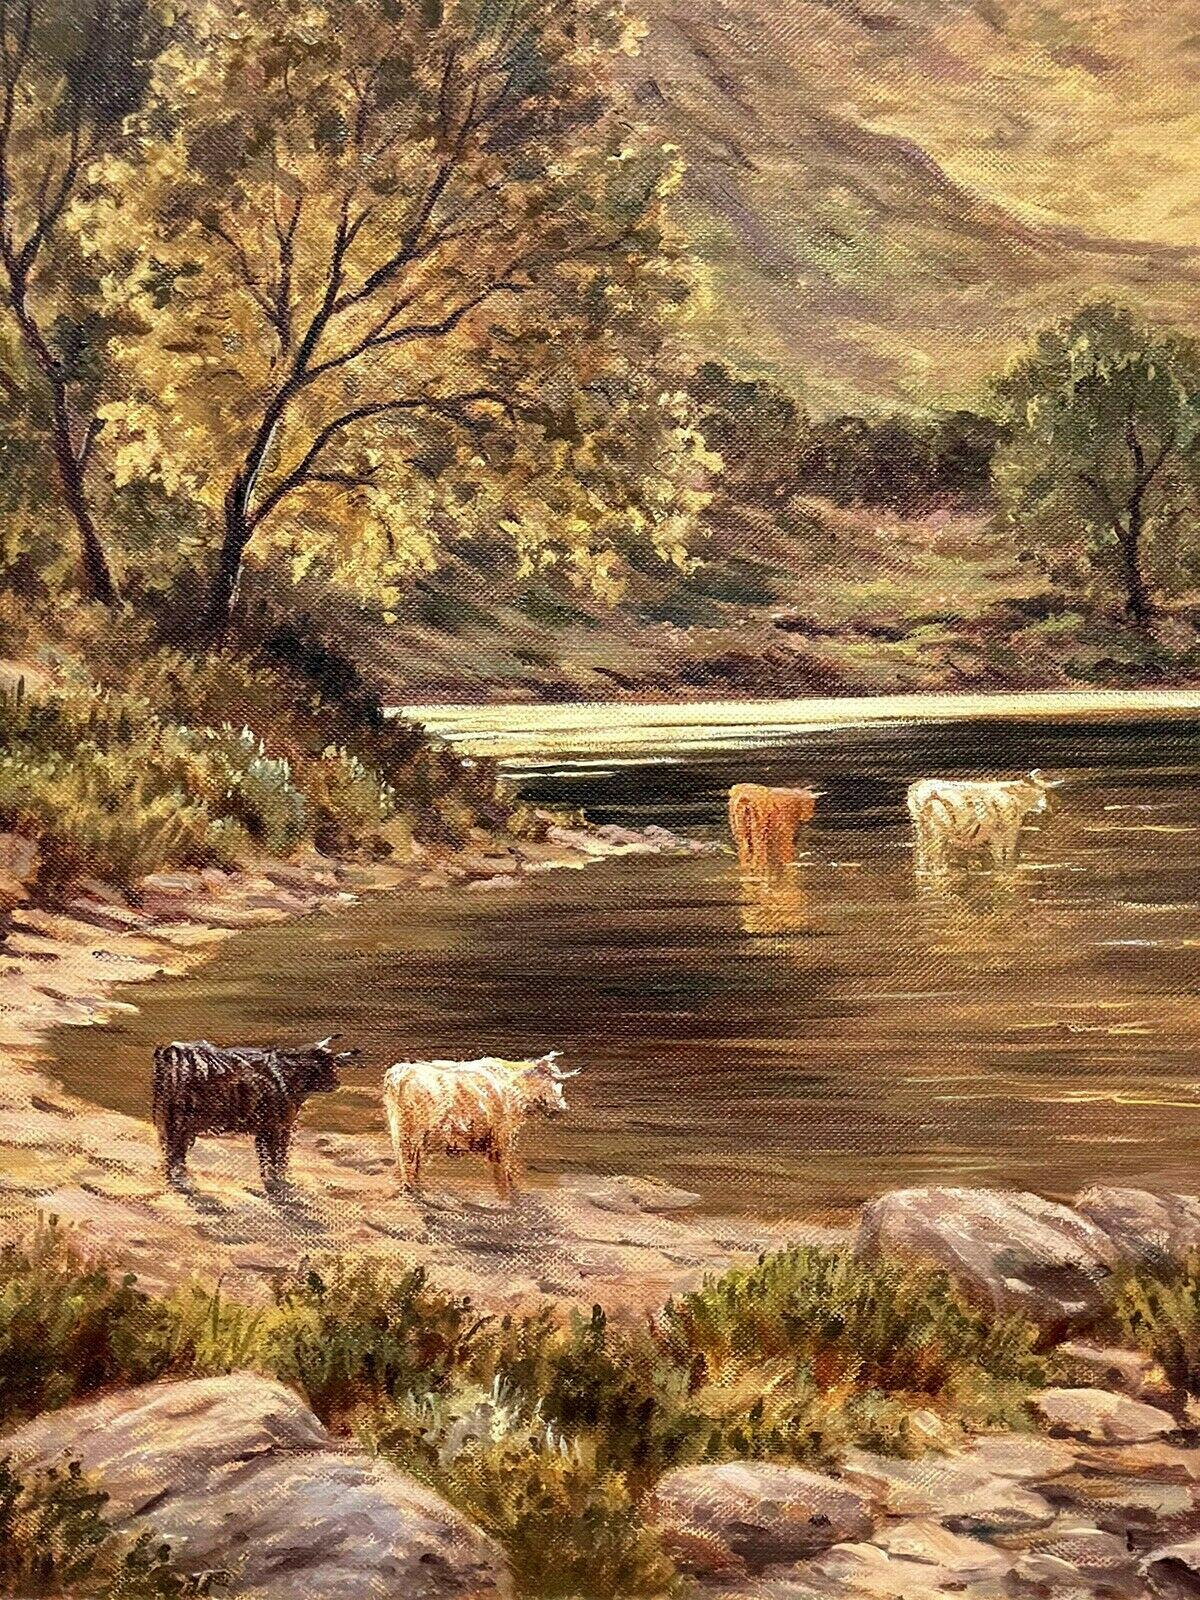 SIGNED SCOTTISH HIGHLANDS LOCH SCENE & CATTLE OIL PAINTING - J. HAMILTON GEORGE - Victorian Painting by J. Hamilton George